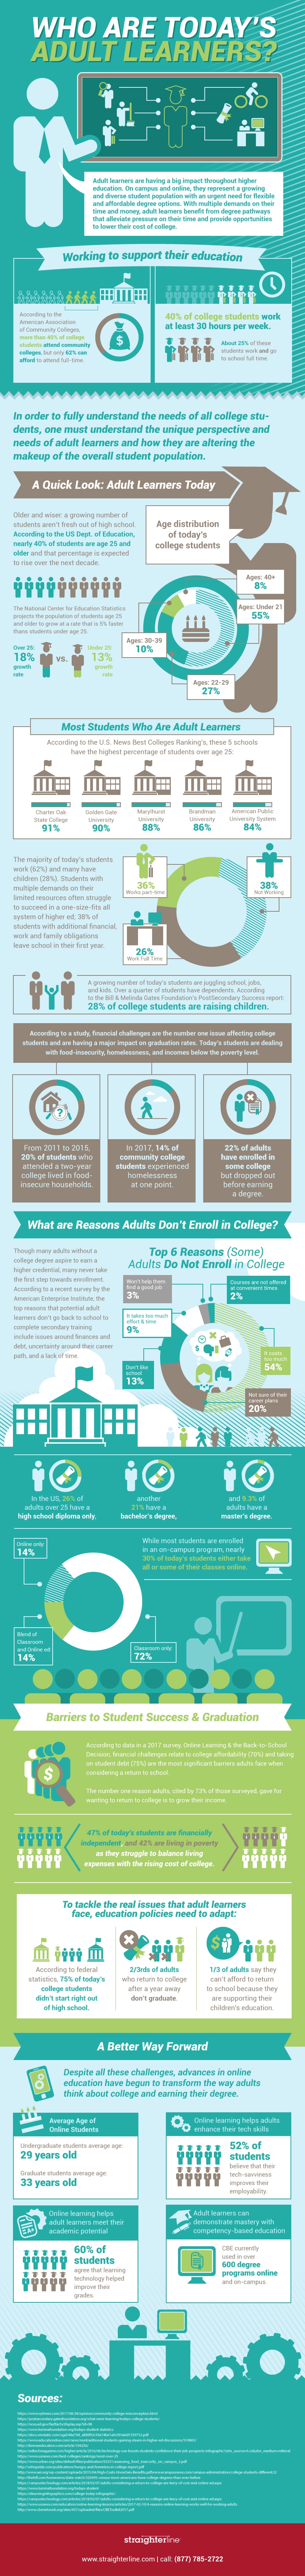 Who Are Today’s Adult Learners Infographic